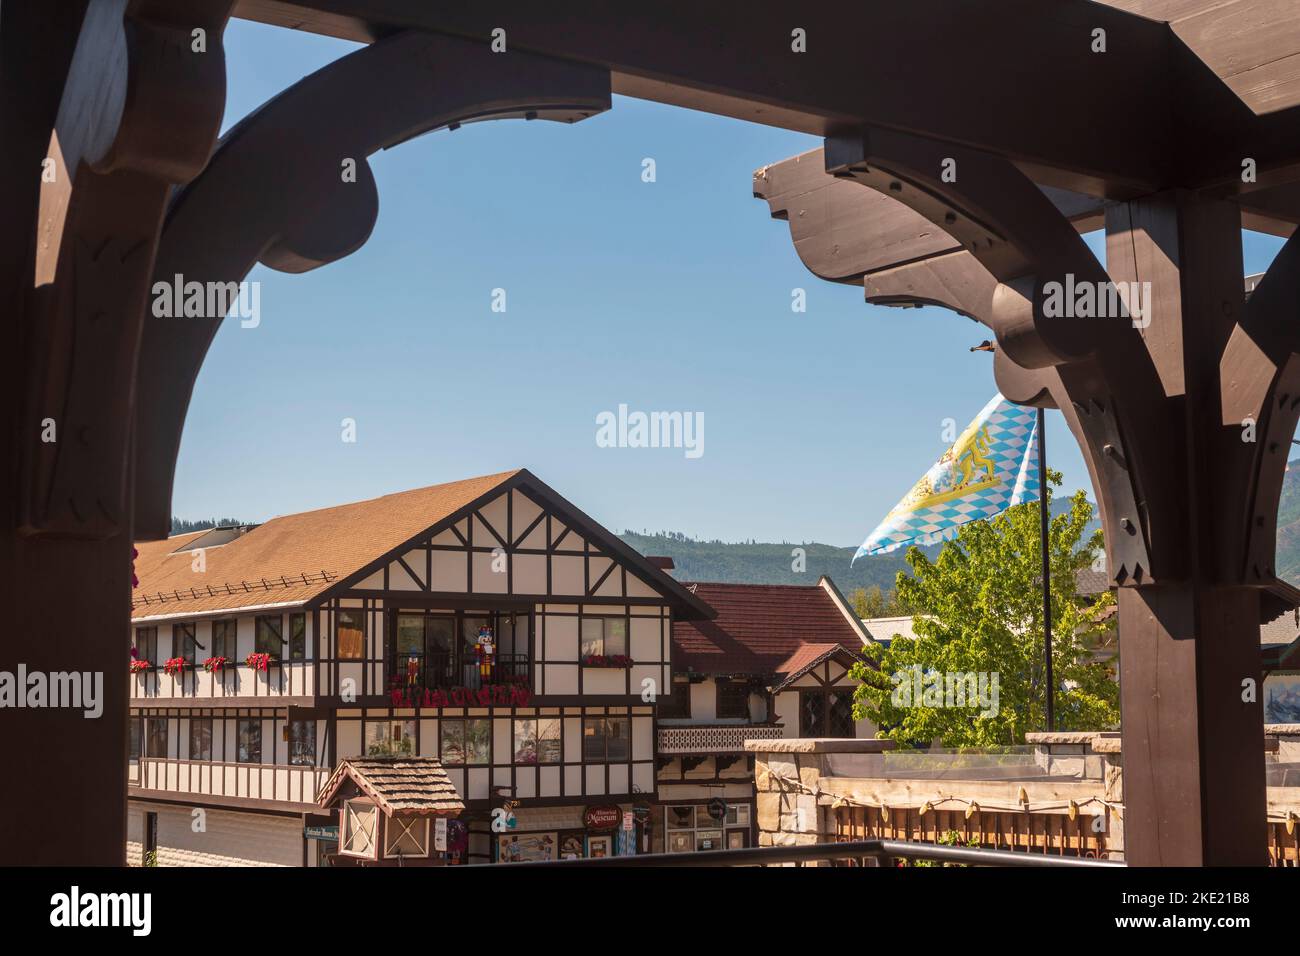 Bavarian style buildings are seen through a decorative arch in the German-themed town of Leavenworth, Washington, USA. Stock Photo